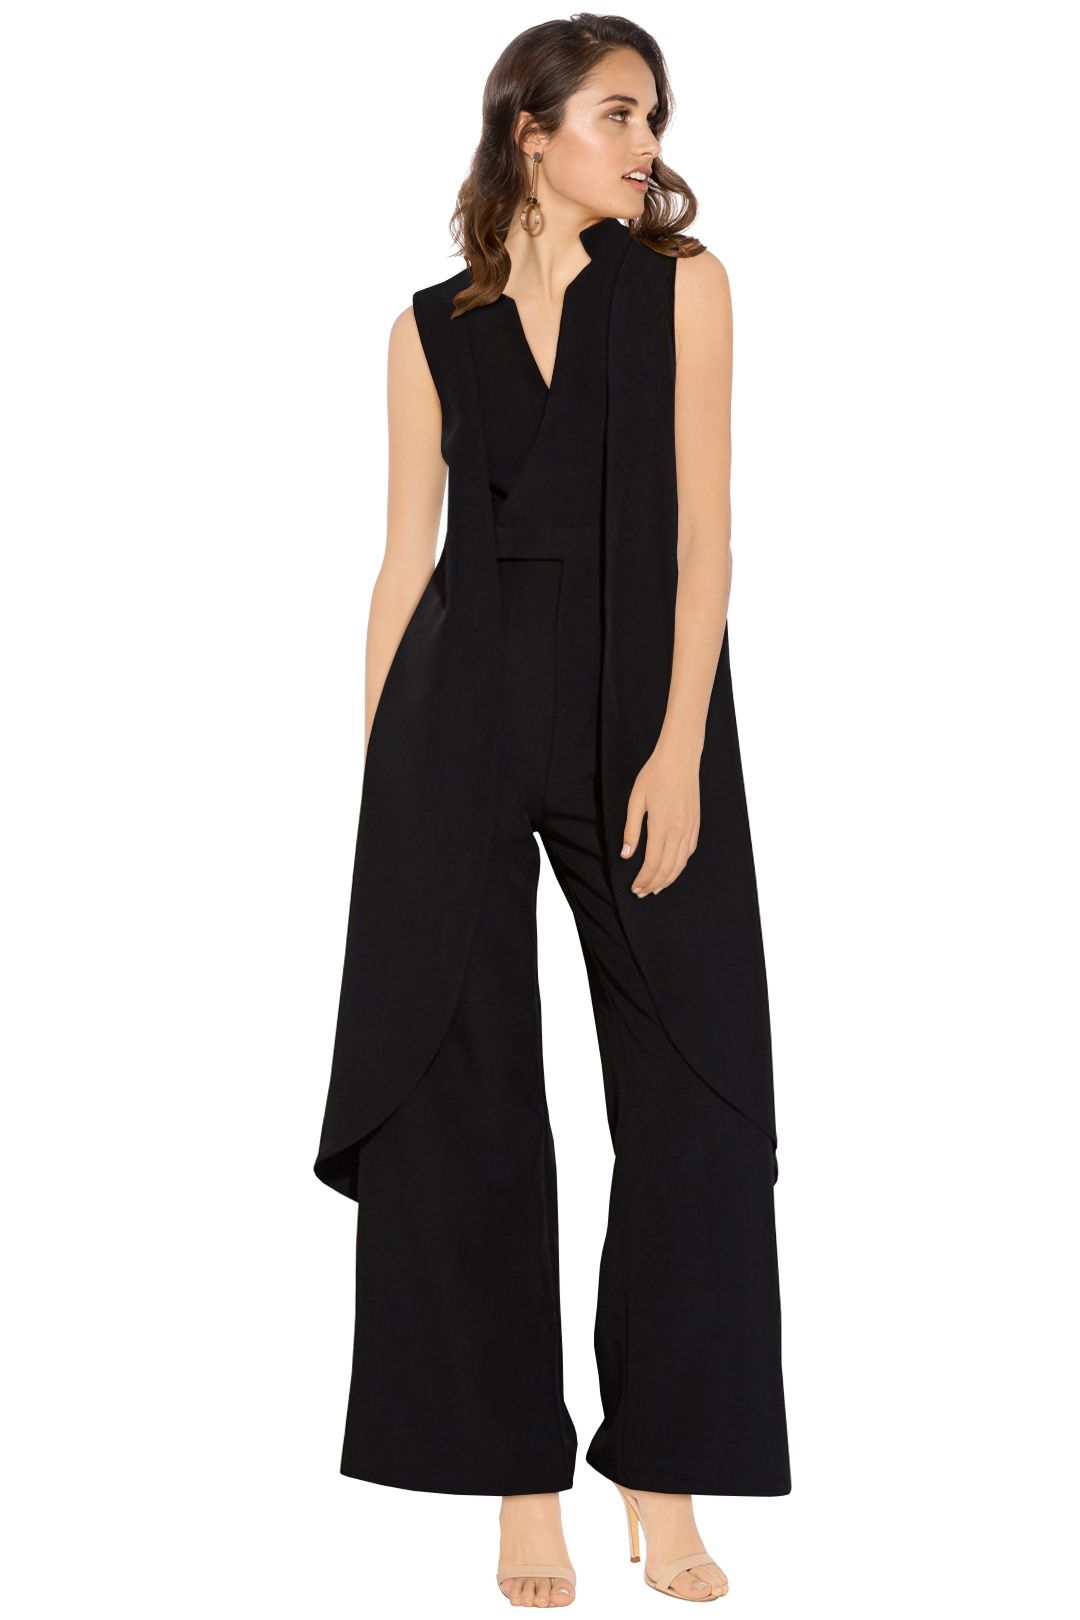 The Super Hero Jumpsuit by Mossman for Hire | GlamCorner